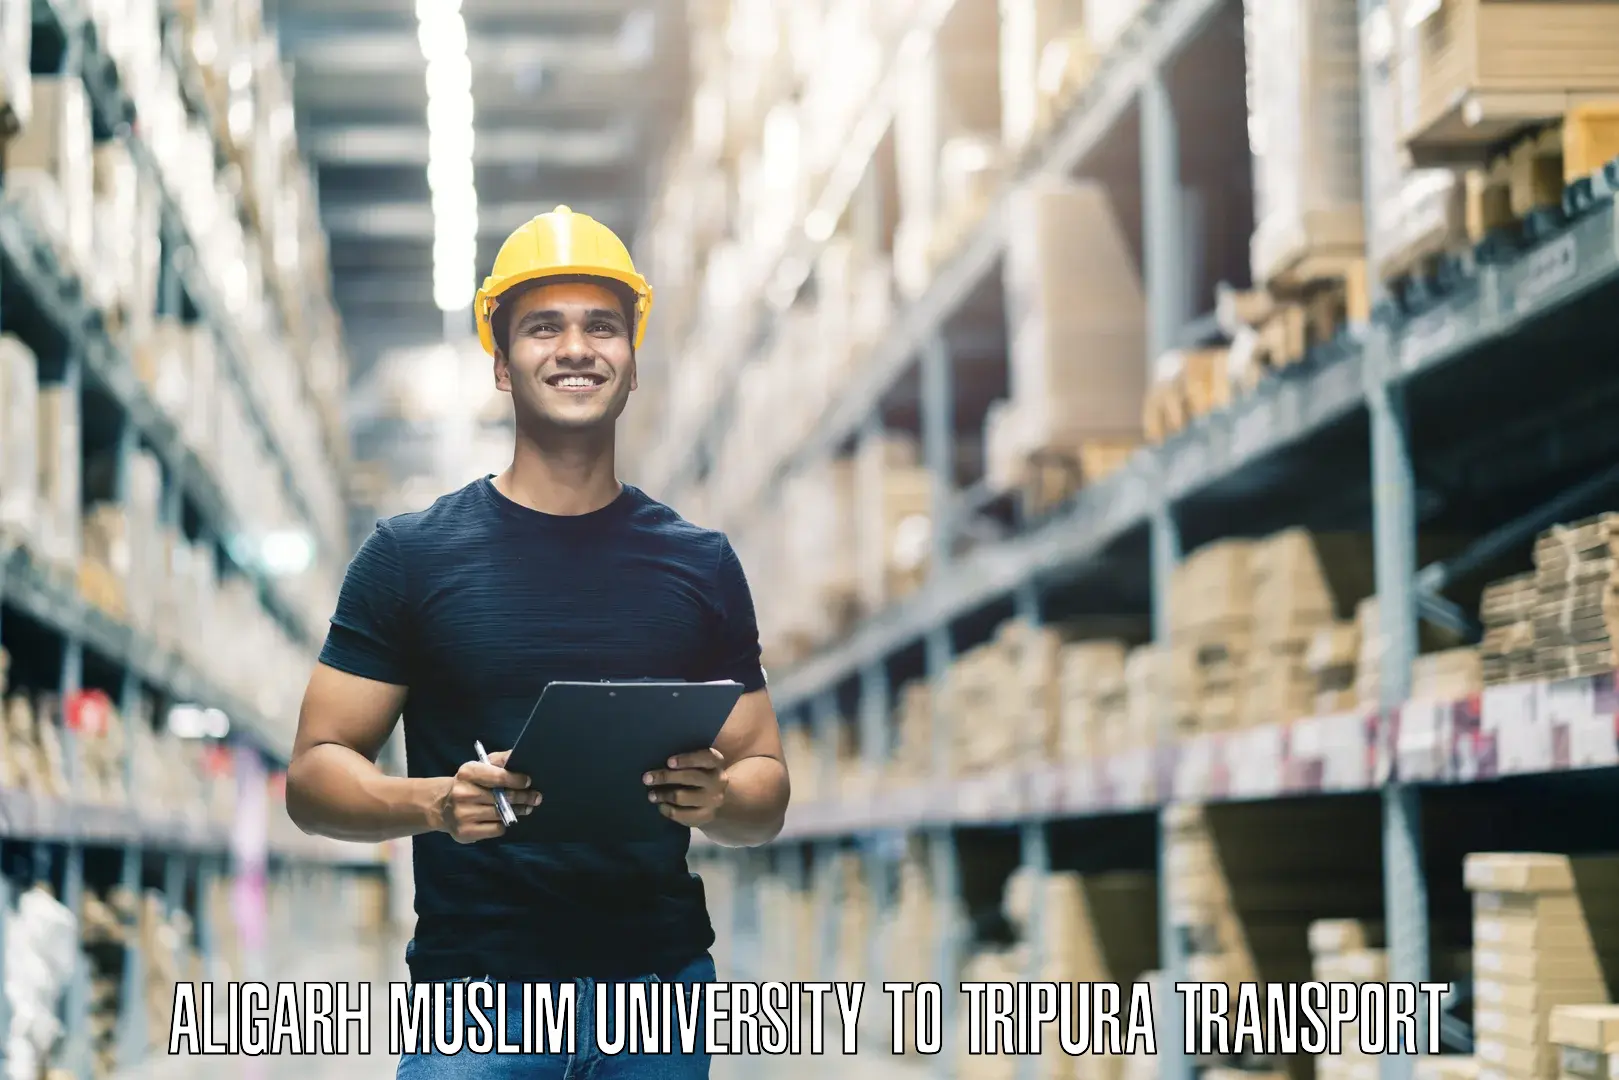 Container transport service Aligarh Muslim University to Dhalai